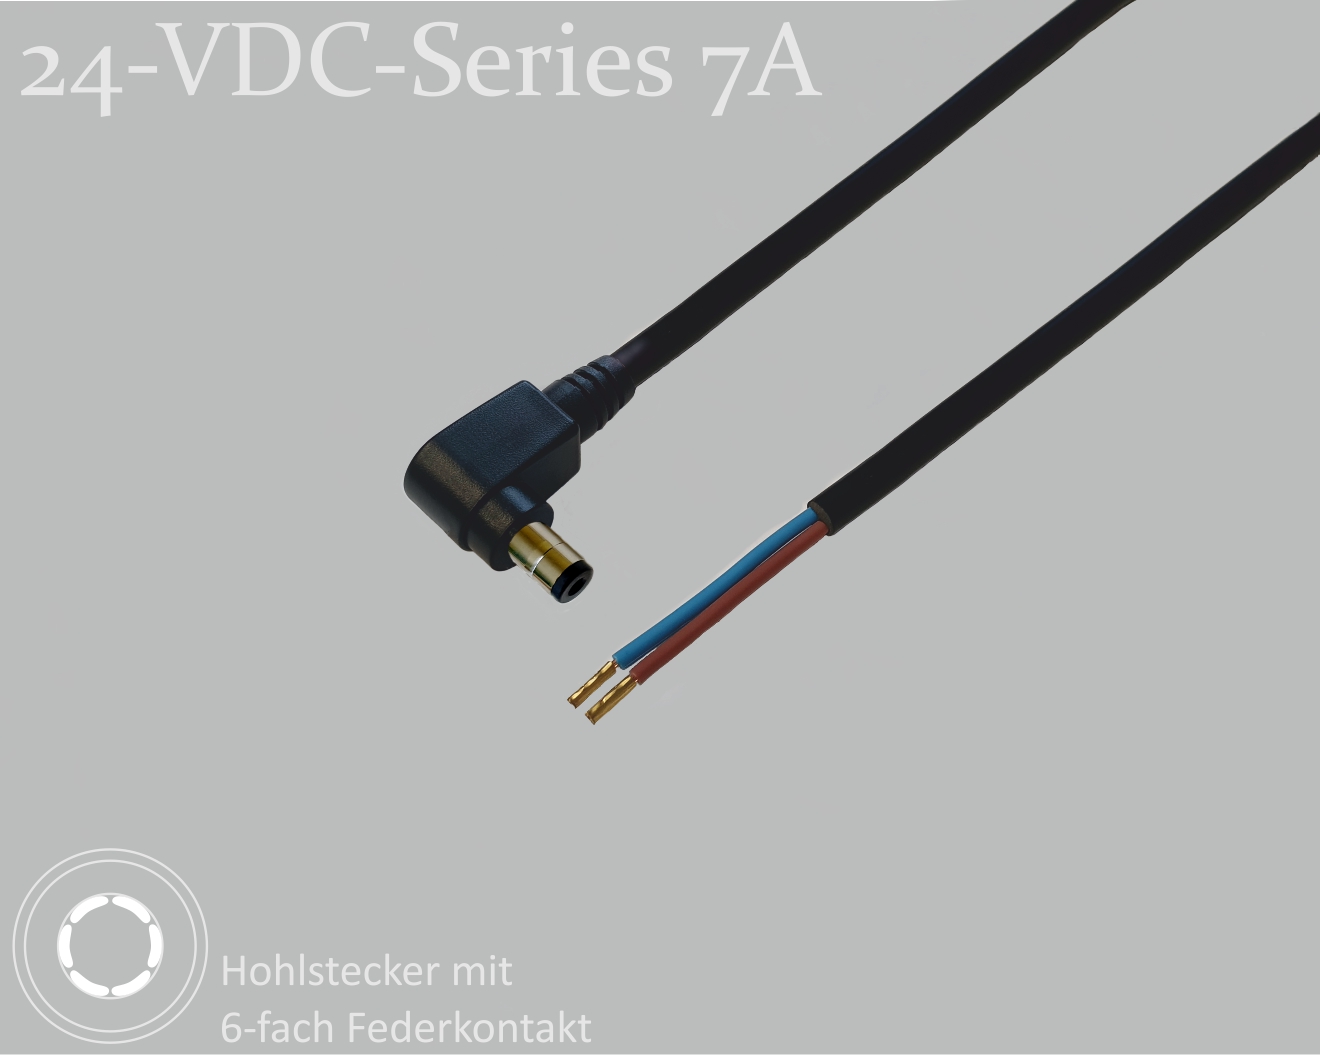 24-VDC-Series 7A, DC connection cable, DC right-angle plug with 4-spring contact 2.5x5.5x9.5mm, round cable 2x0.50mm², black, wire end sleeves, 0.75m